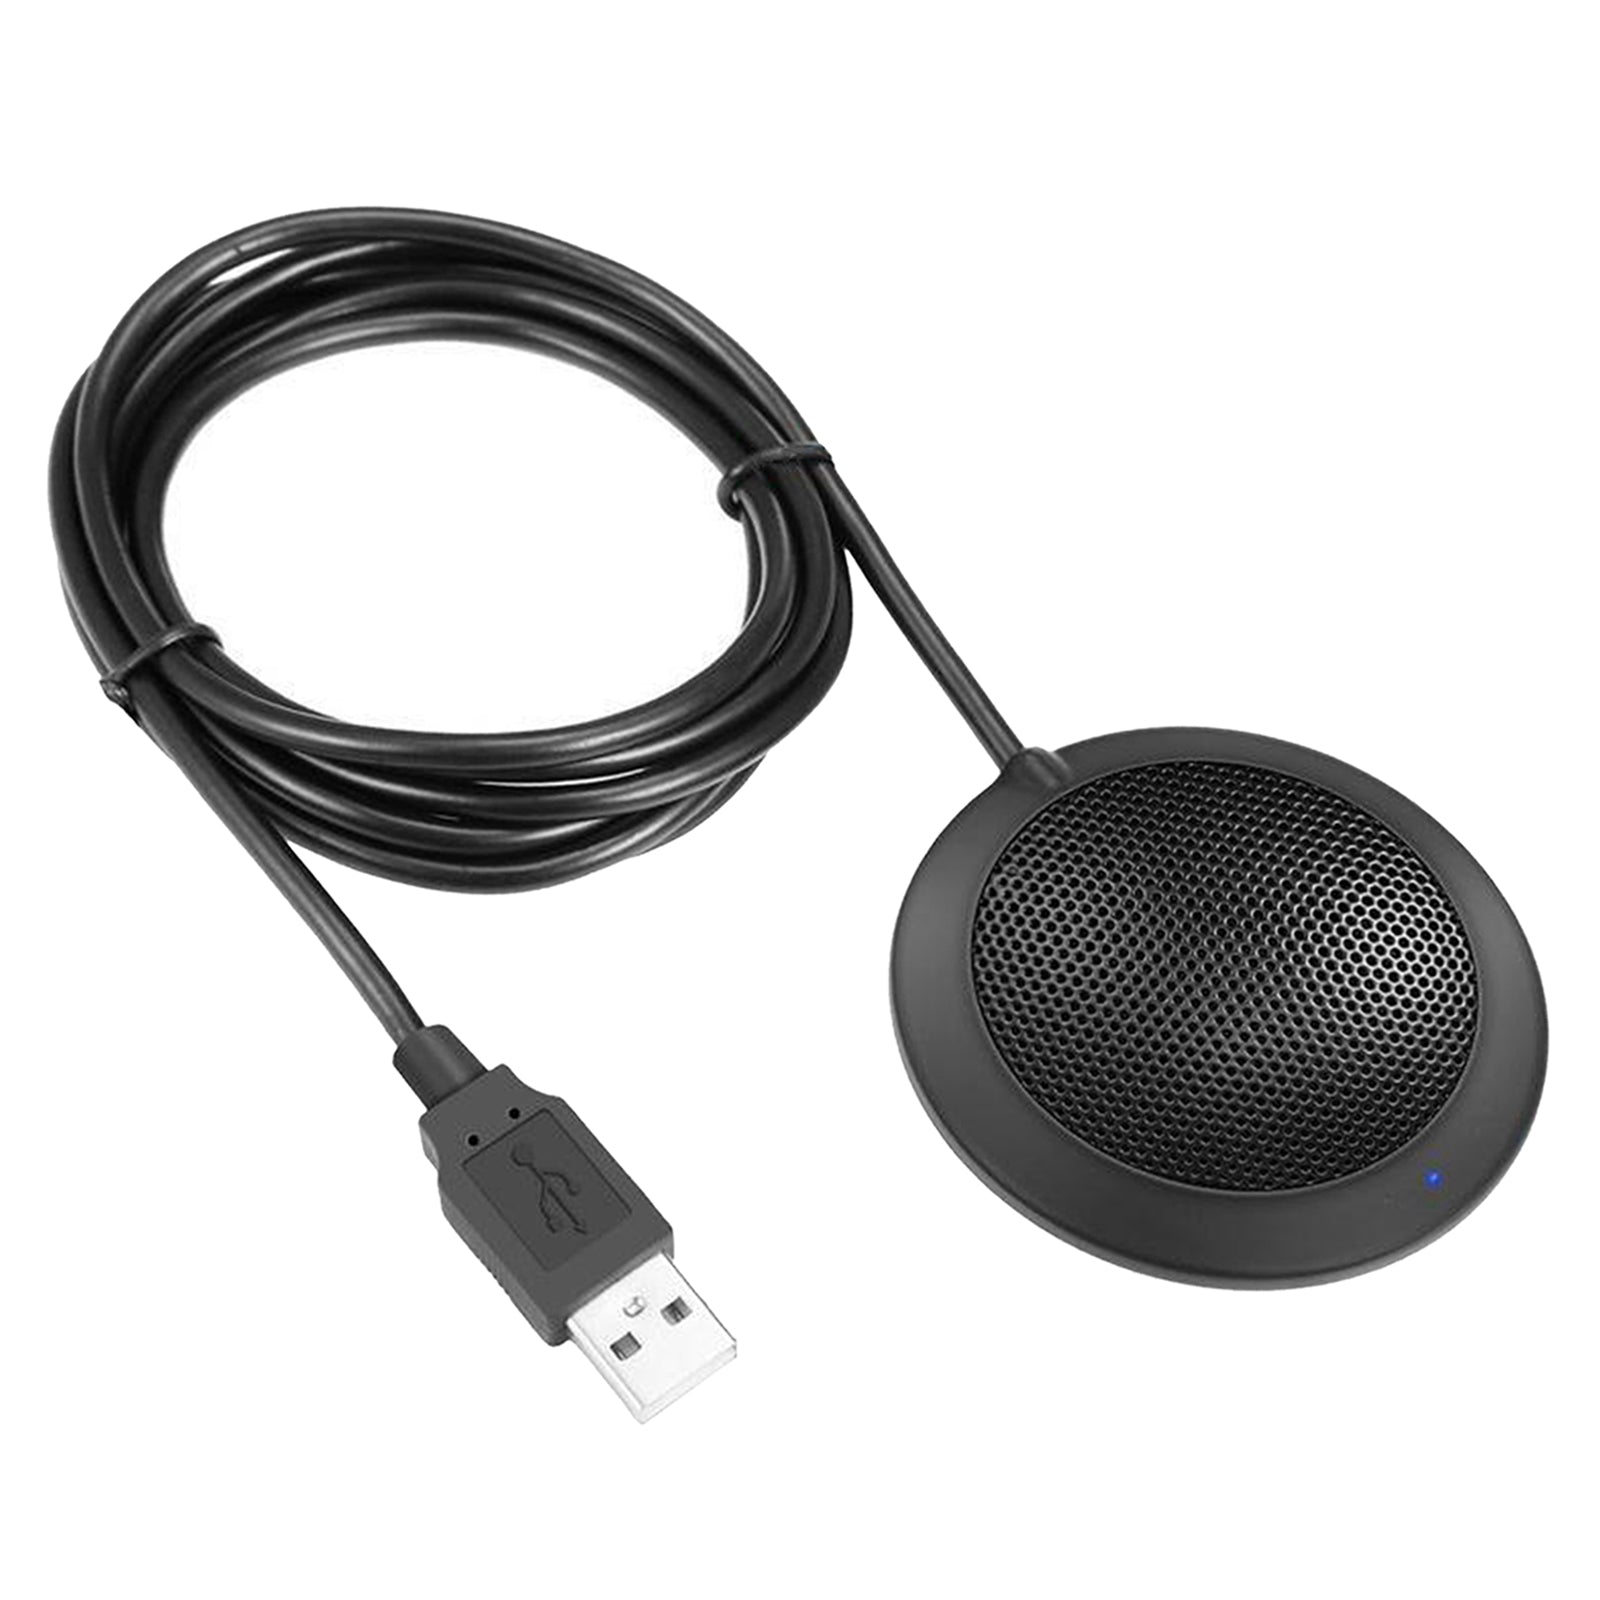 Omni-Directional 360Degree Conference Microphone USB for Desktop Conference